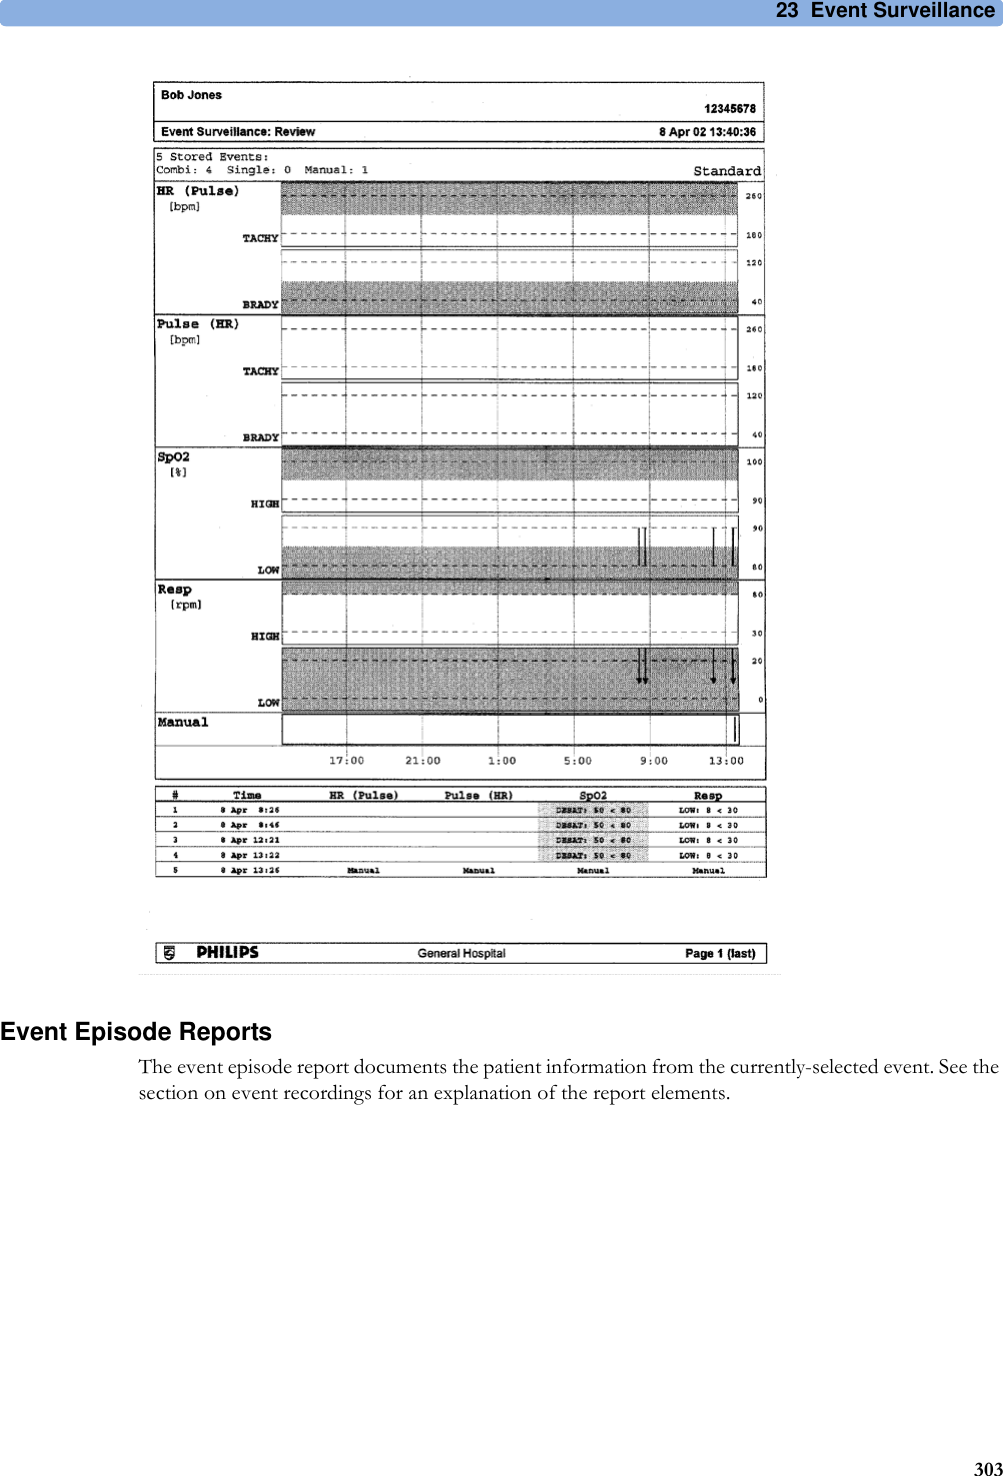 23 Event Surveillance303Event Episode ReportsThe event episode report documents the patient information from the currently-selected event. See the section on event recordings for an explanation of the report elements.